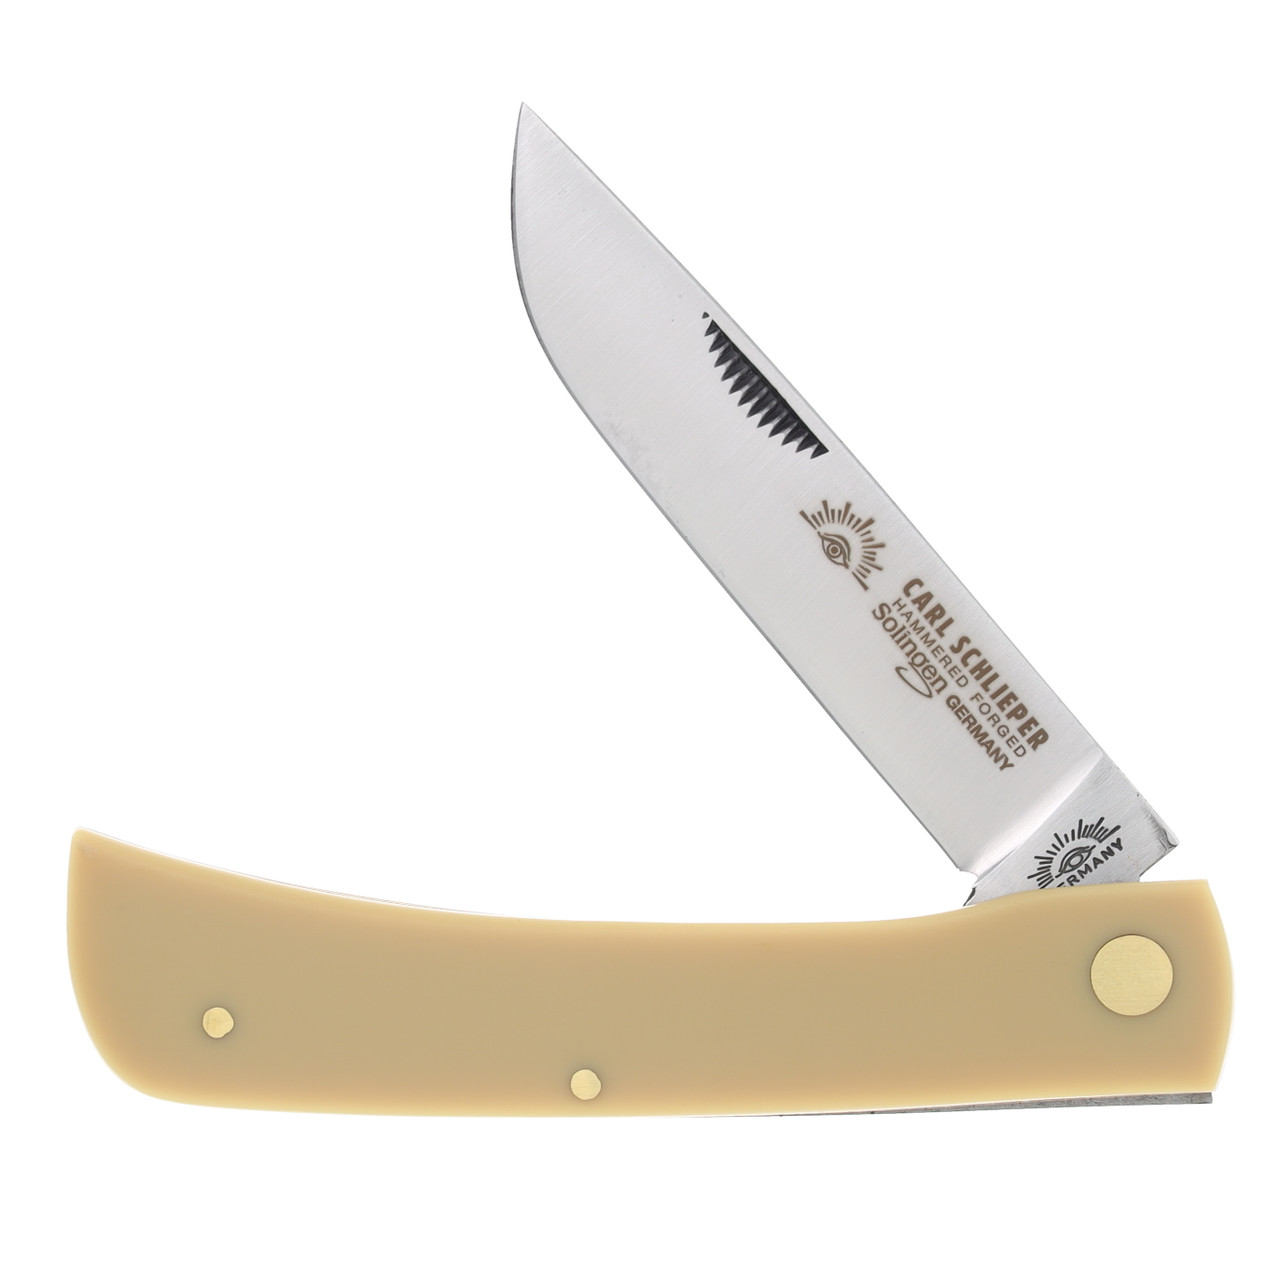 Eye Brand Yellow Composition Clodbuster Folding Knife - Smoky Mountain  Knife Works